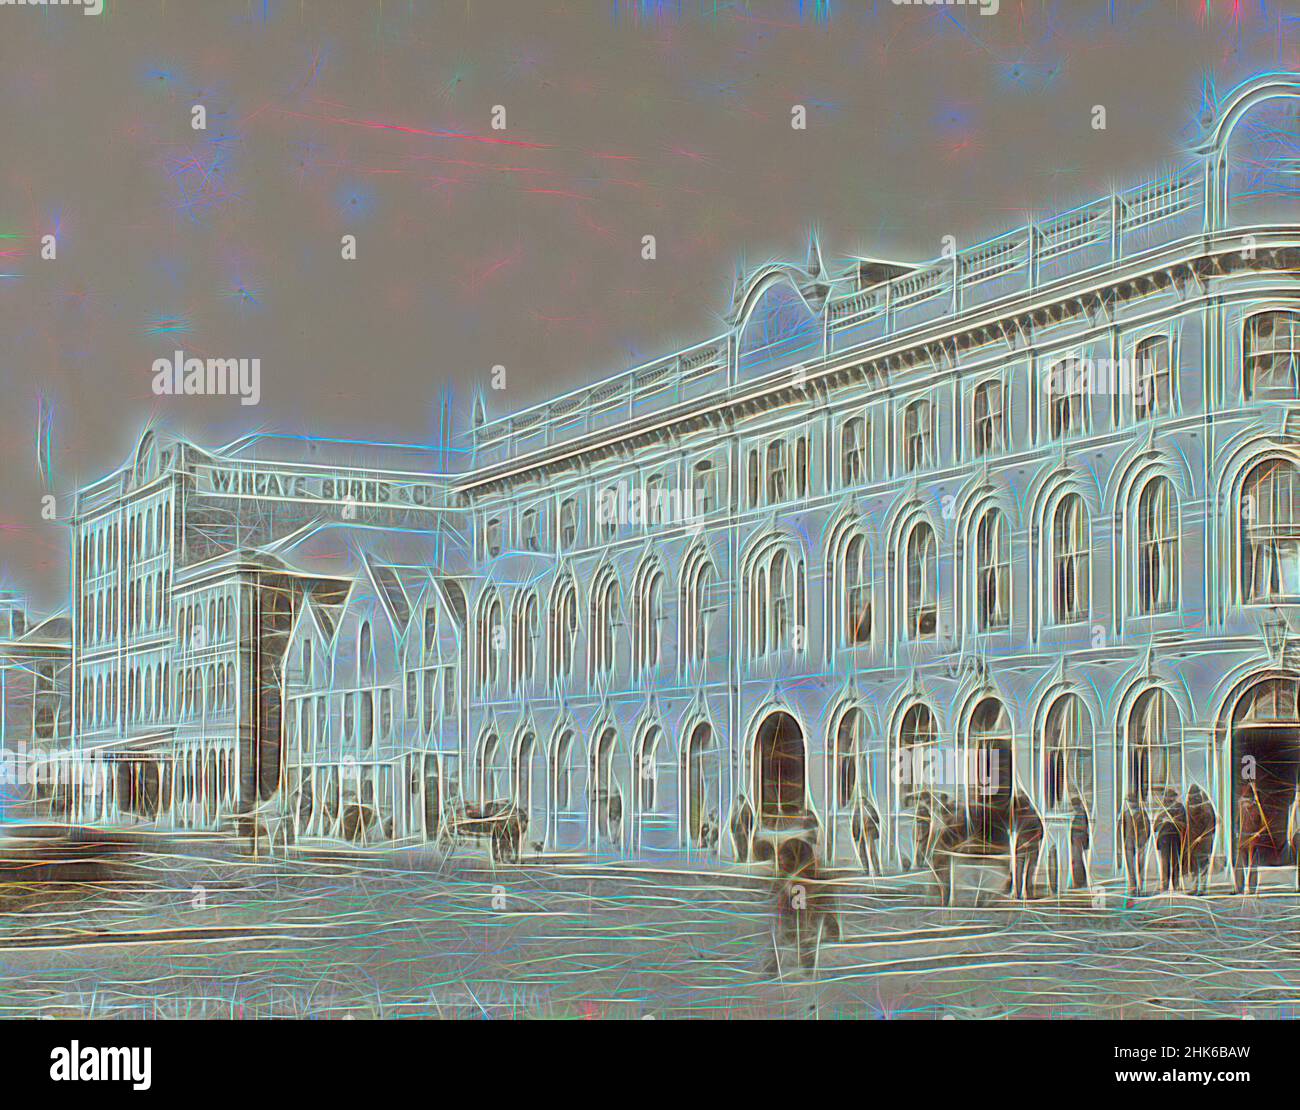 Inspired by Custom House St. - Auckland, Burton Brothers studio, photography studio, 1800s, Dunedin, photography, Reimagined by Artotop. Classic art reinvented with a modern twist. Design of warm cheerful glowing of brightness and light ray radiance. Photography inspired by surrealism and futurism, embracing dynamic energy of modern technology, movement, speed and revolutionize culture Stock Photo